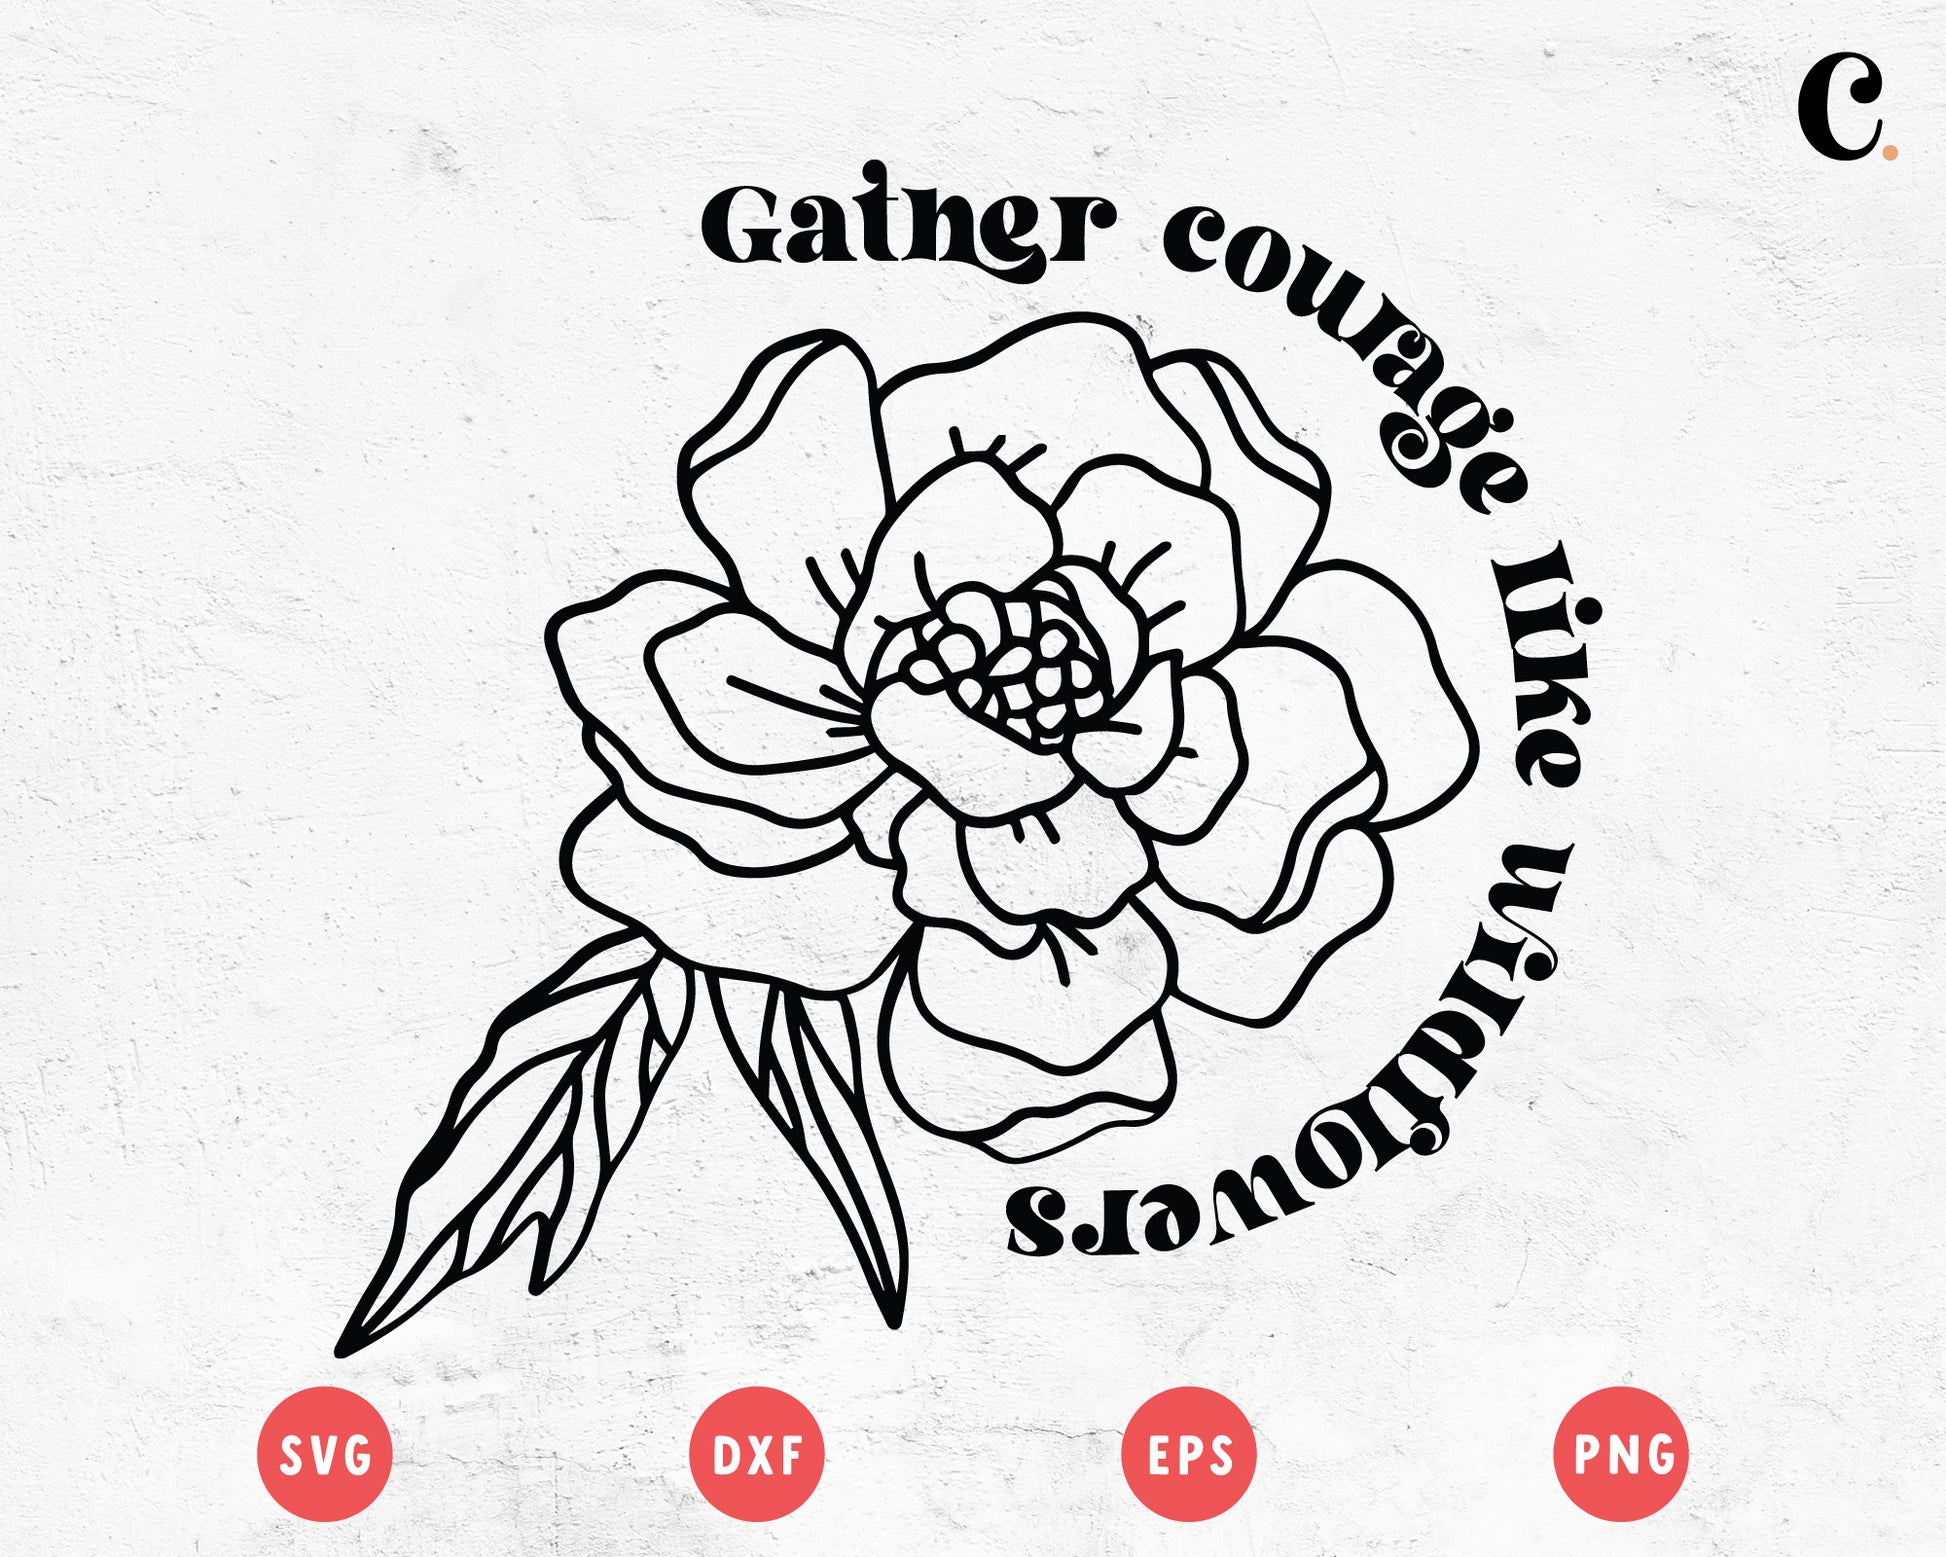 Boho Flower SVG | Gather Courage Like Wildflower SVG Cut File for Cricut, Cameo Silhouette